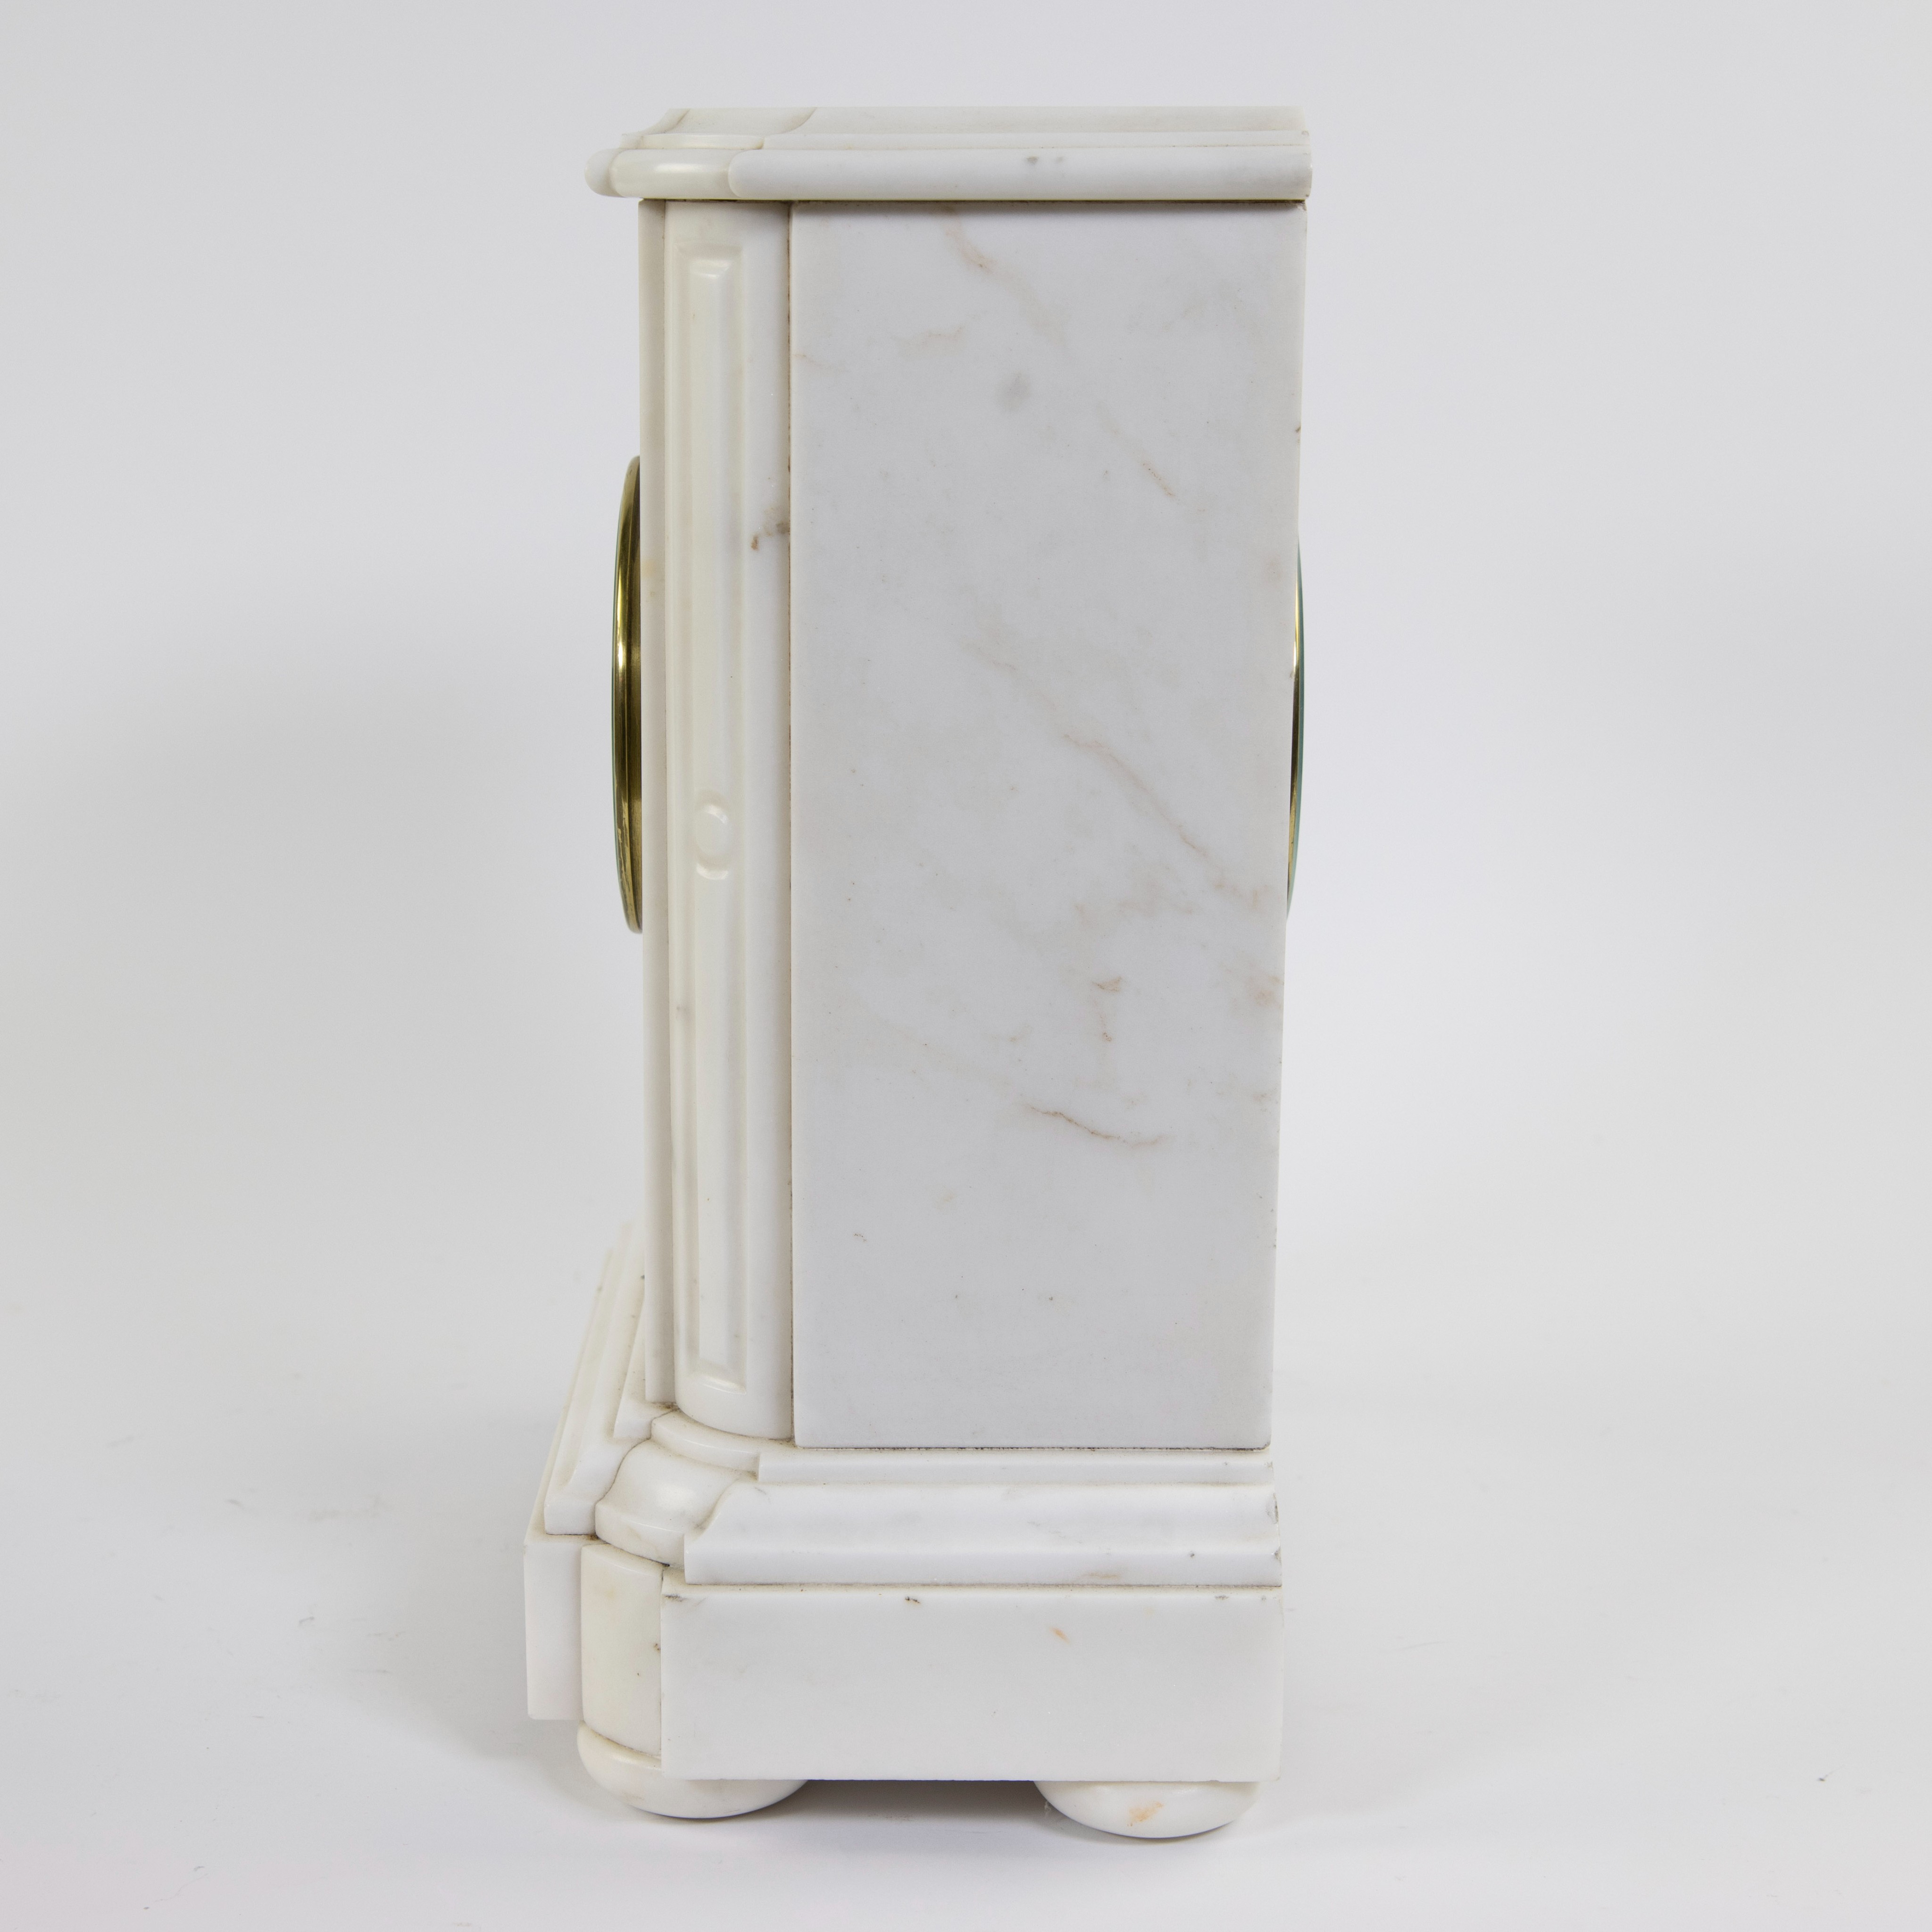 Antique white marble clock, French - Image 2 of 4